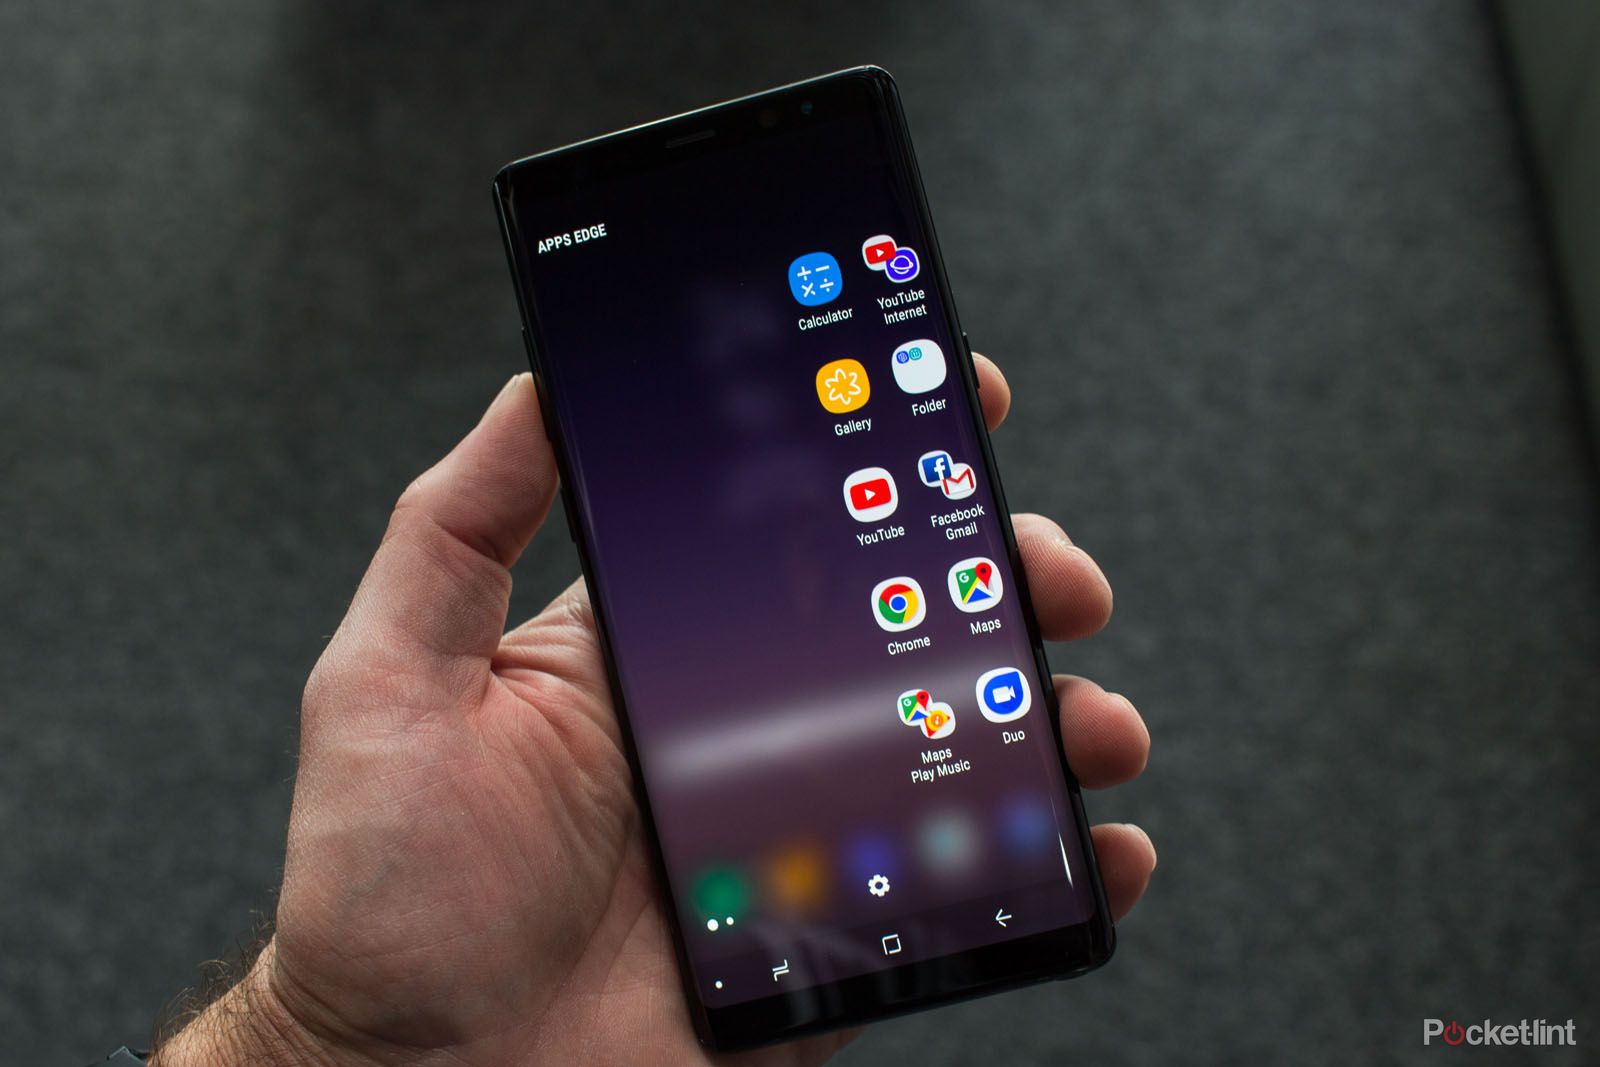 Samsung Galaxy Note 8 tips and tricks image 3